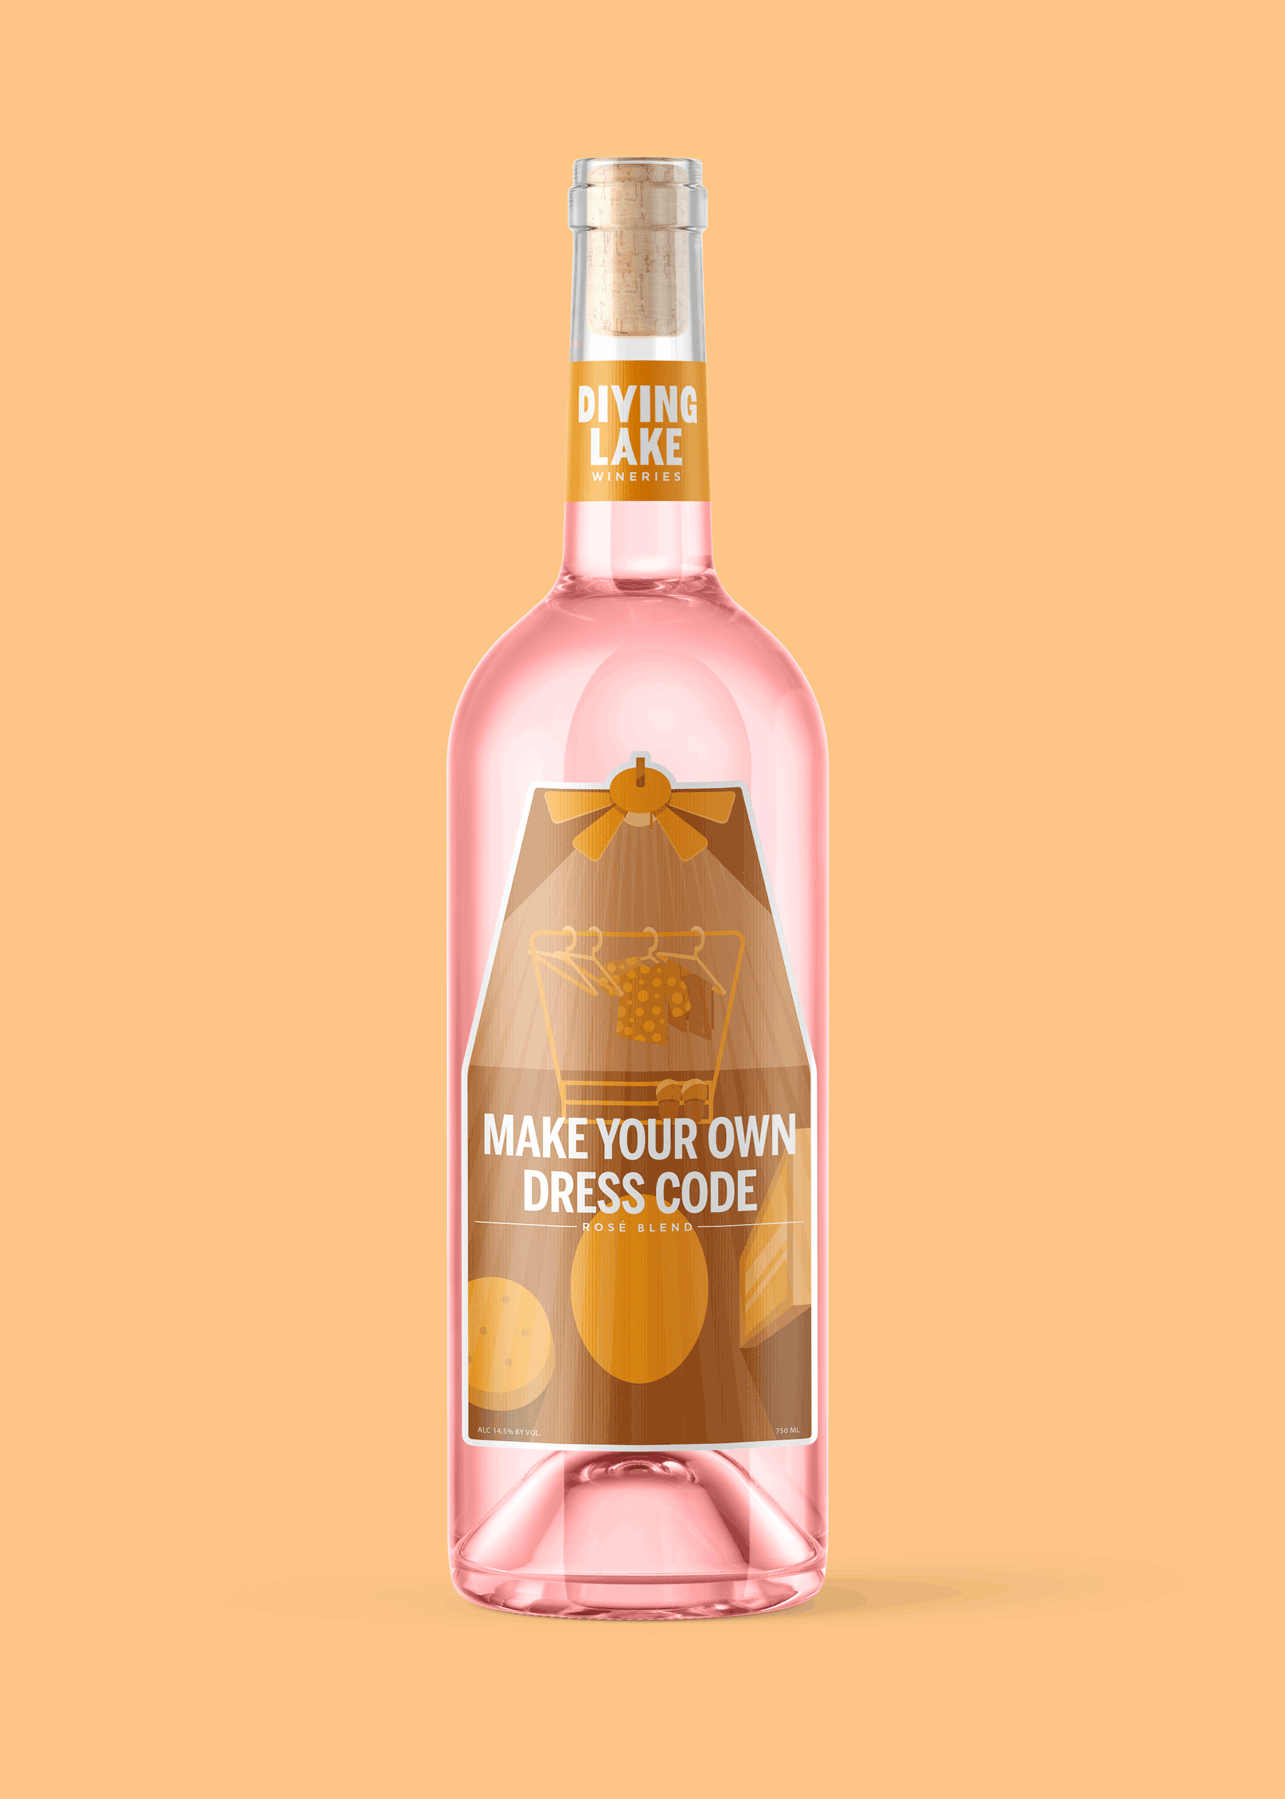 Gif of a wine bottle spinning. Label says 'Make Your Own Dress Code